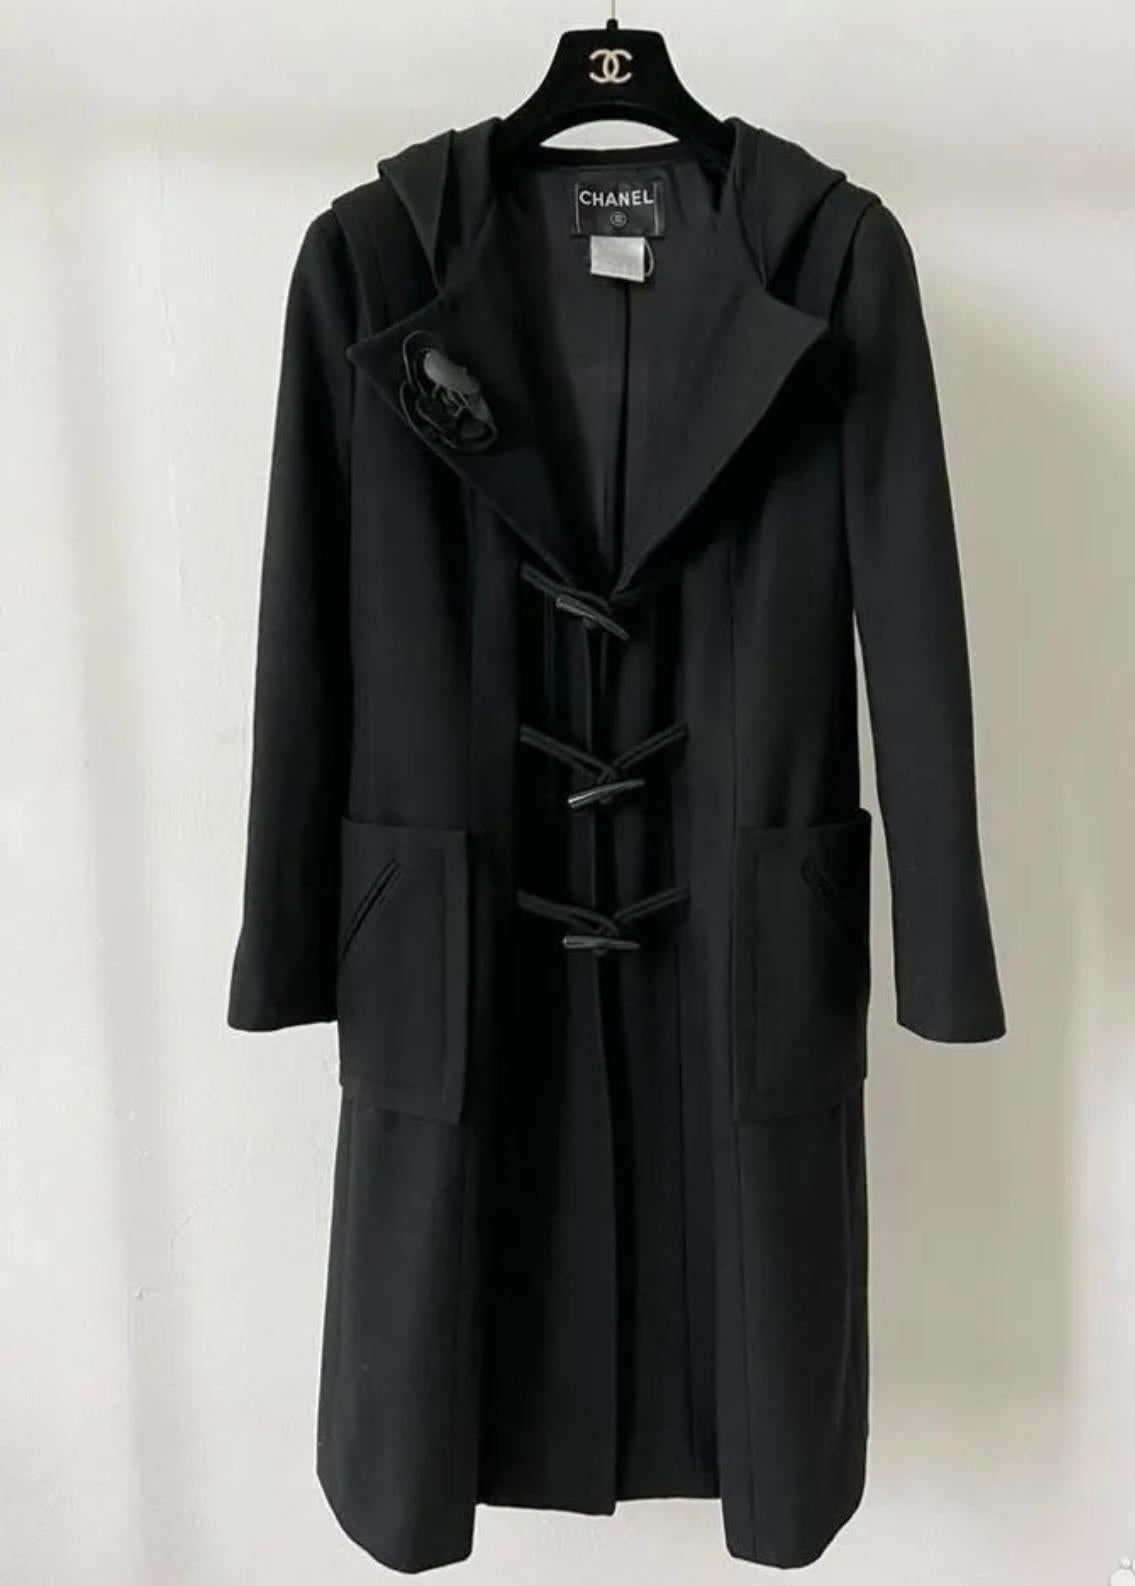 Chanel black duffle coat with Camellia Brooch.
- CC logo wooden closures
- silk lining
Size mark 42 FR. Condition is pristine.